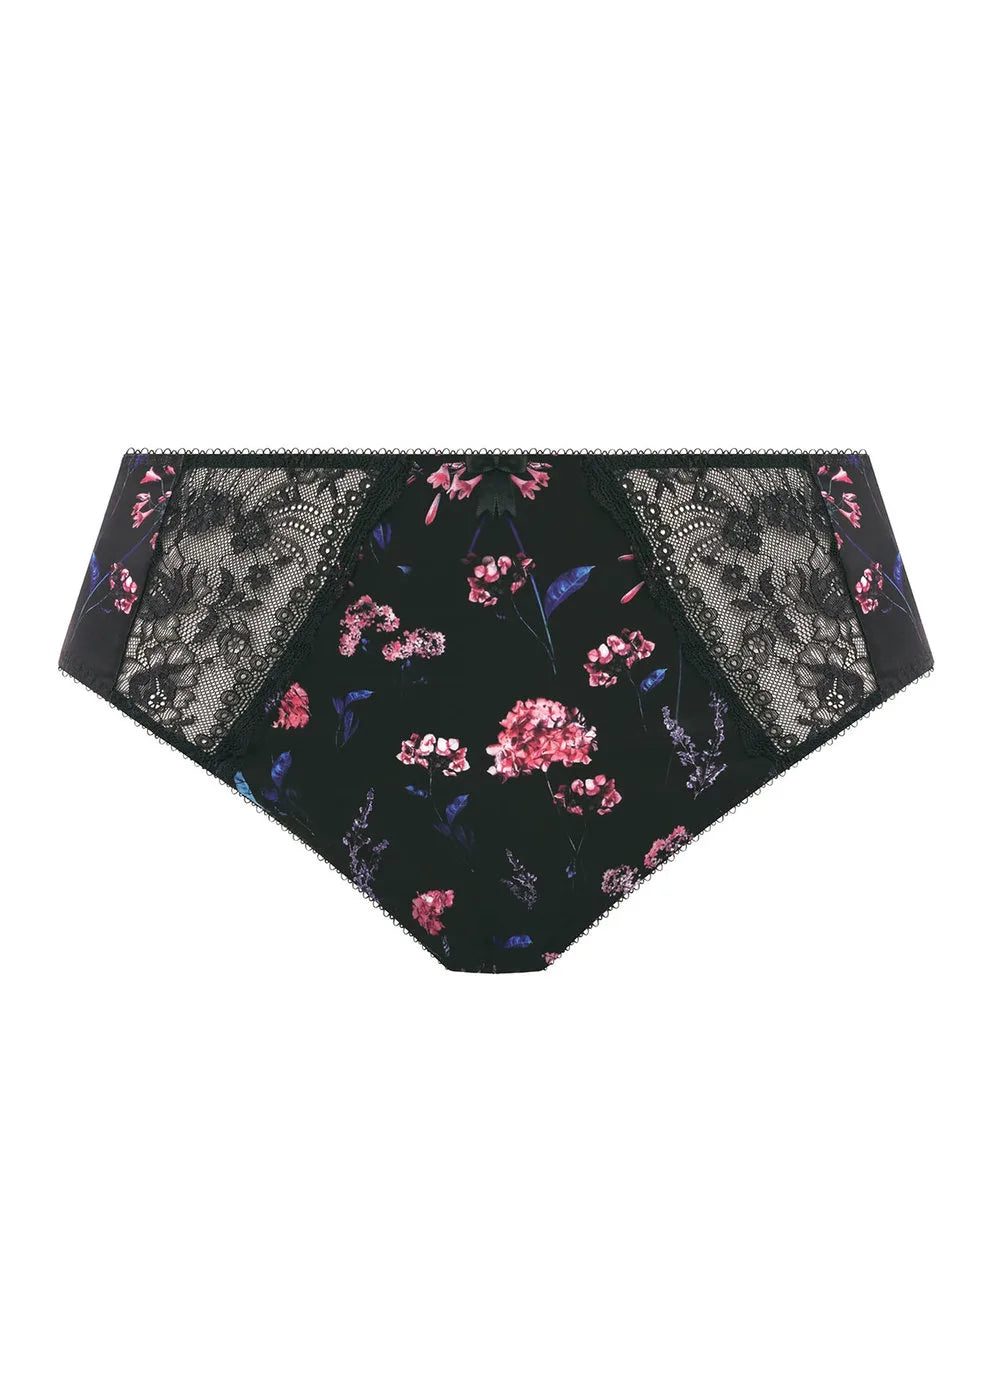 MORGAN Full Brief from Elomi at Belle Lacet Lingerie